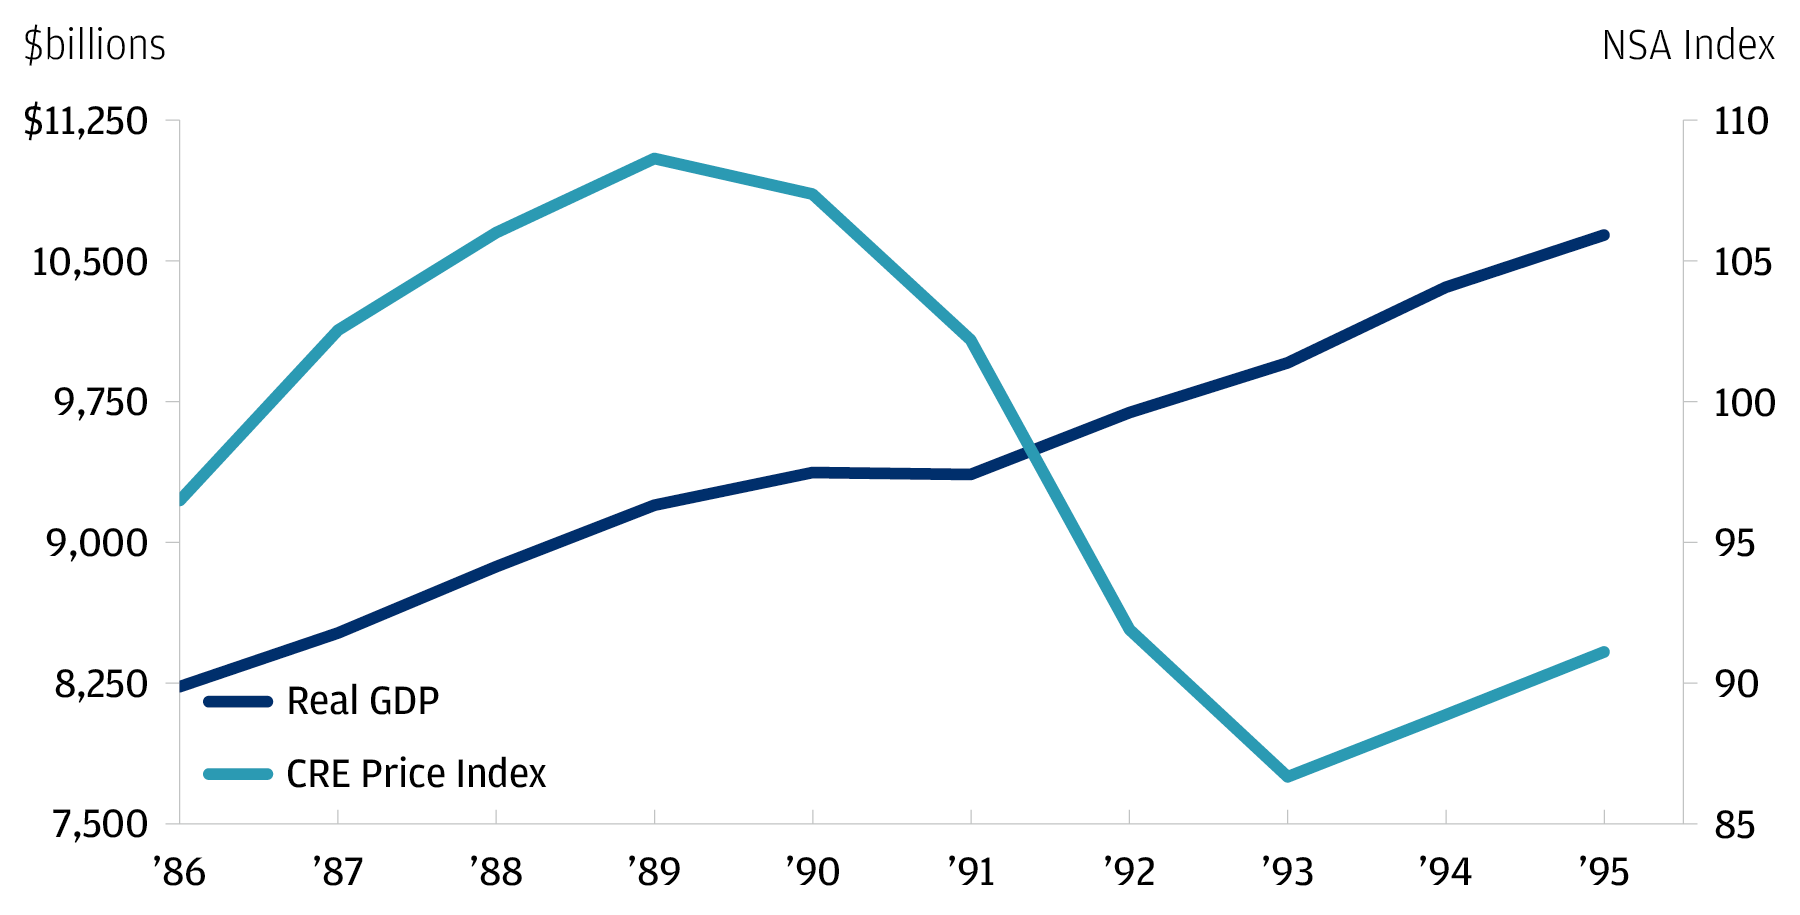 In 1990s, GDP was barely affected by drawdown in CRE